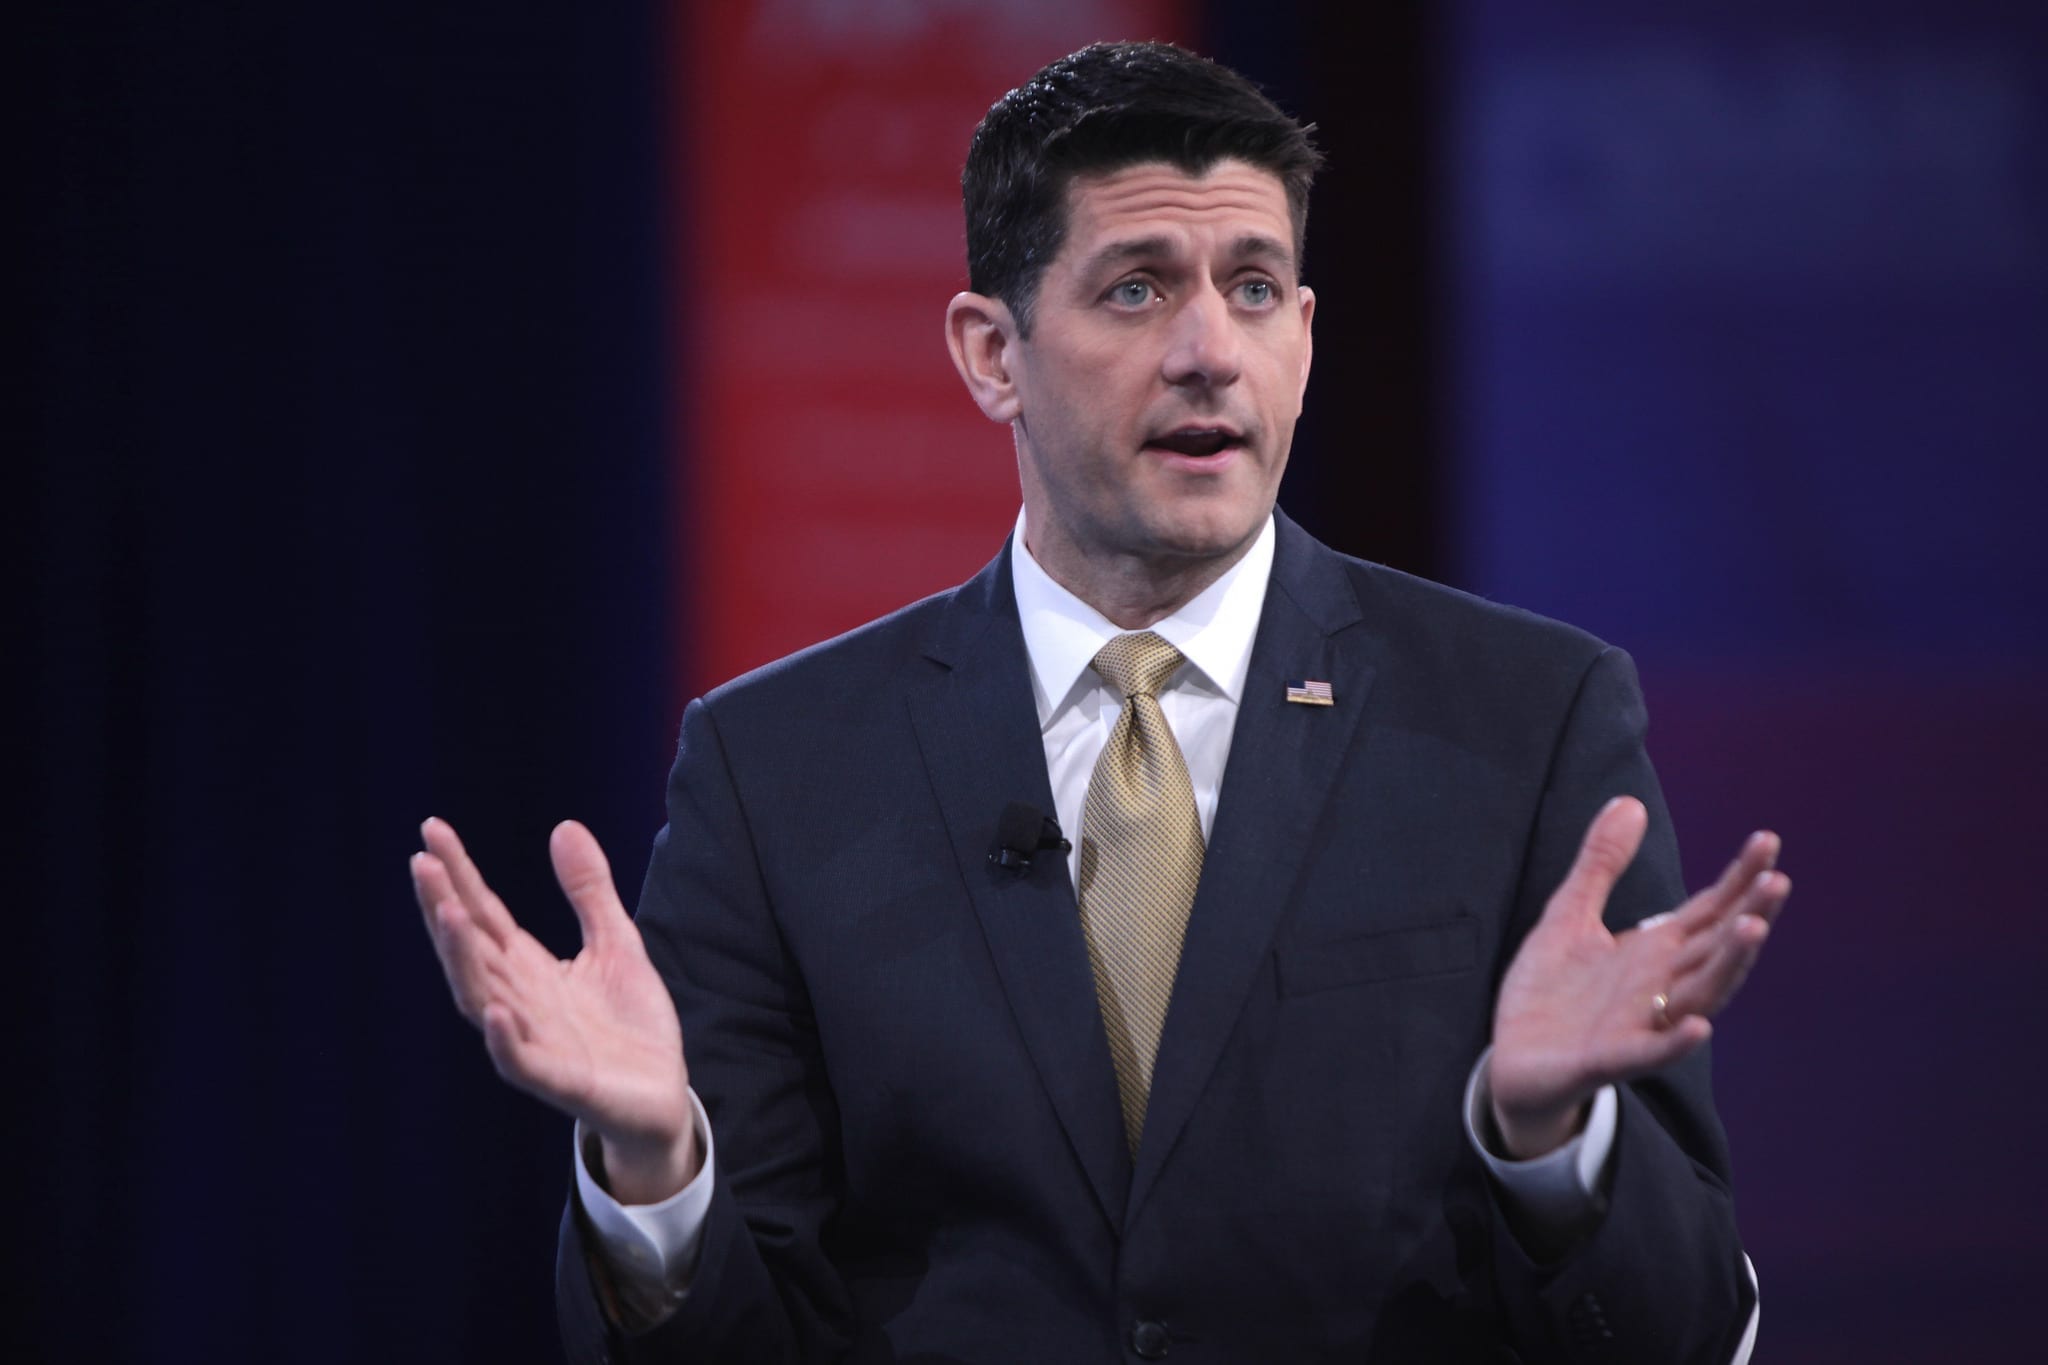 Speaker of the House Paul Ryan; image by Gage Skidmore, via Flickr, CC BY-SA 2.0, no changes.